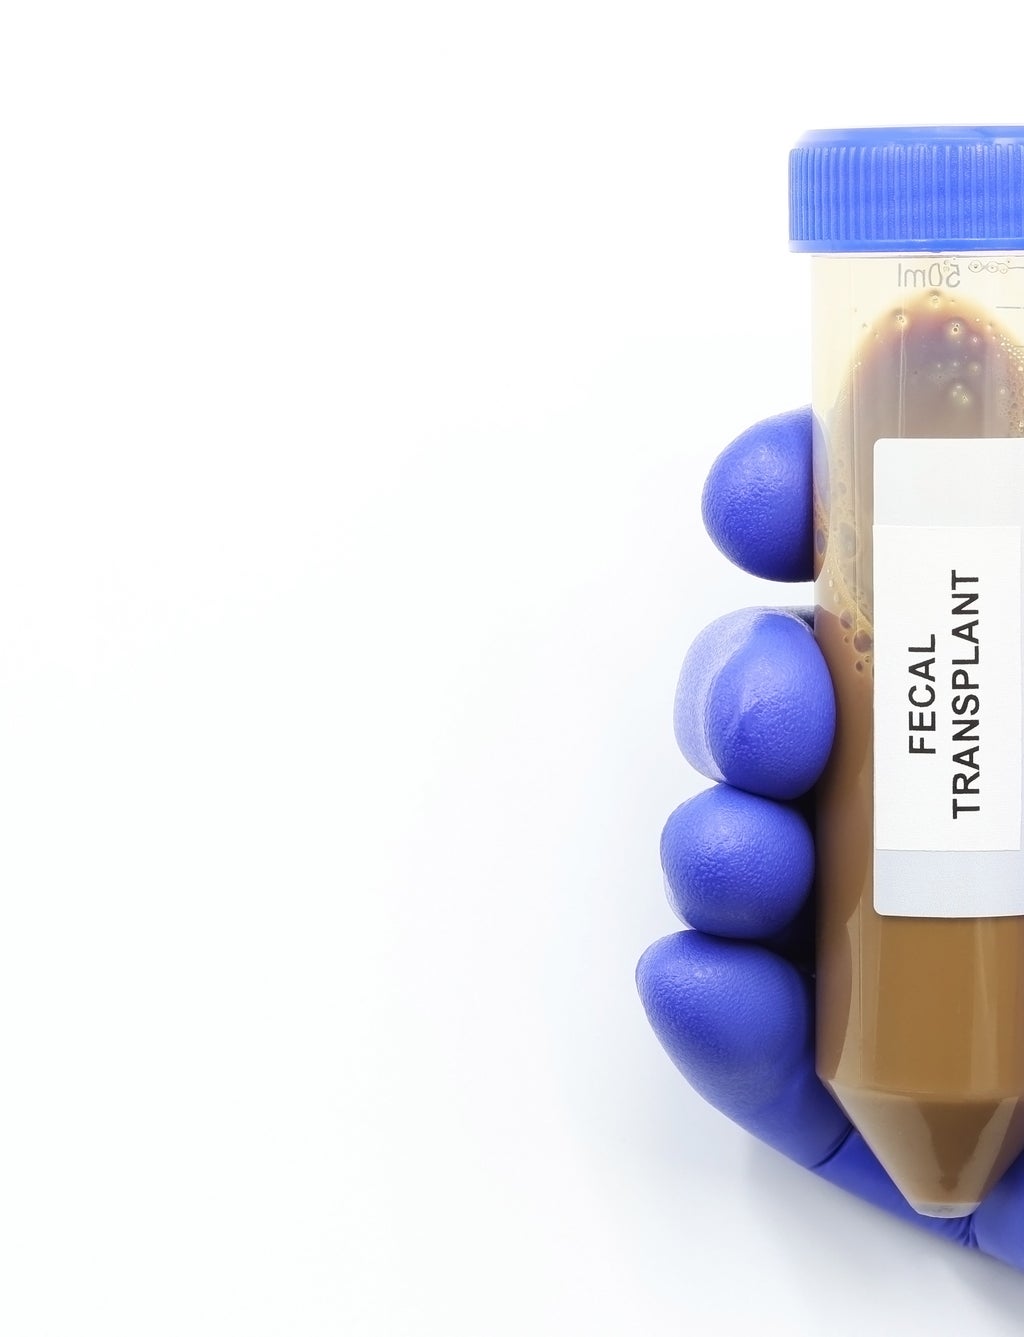 A gloved hand holding a medical vial labeled &quot;Fecal Transplant.&quot;